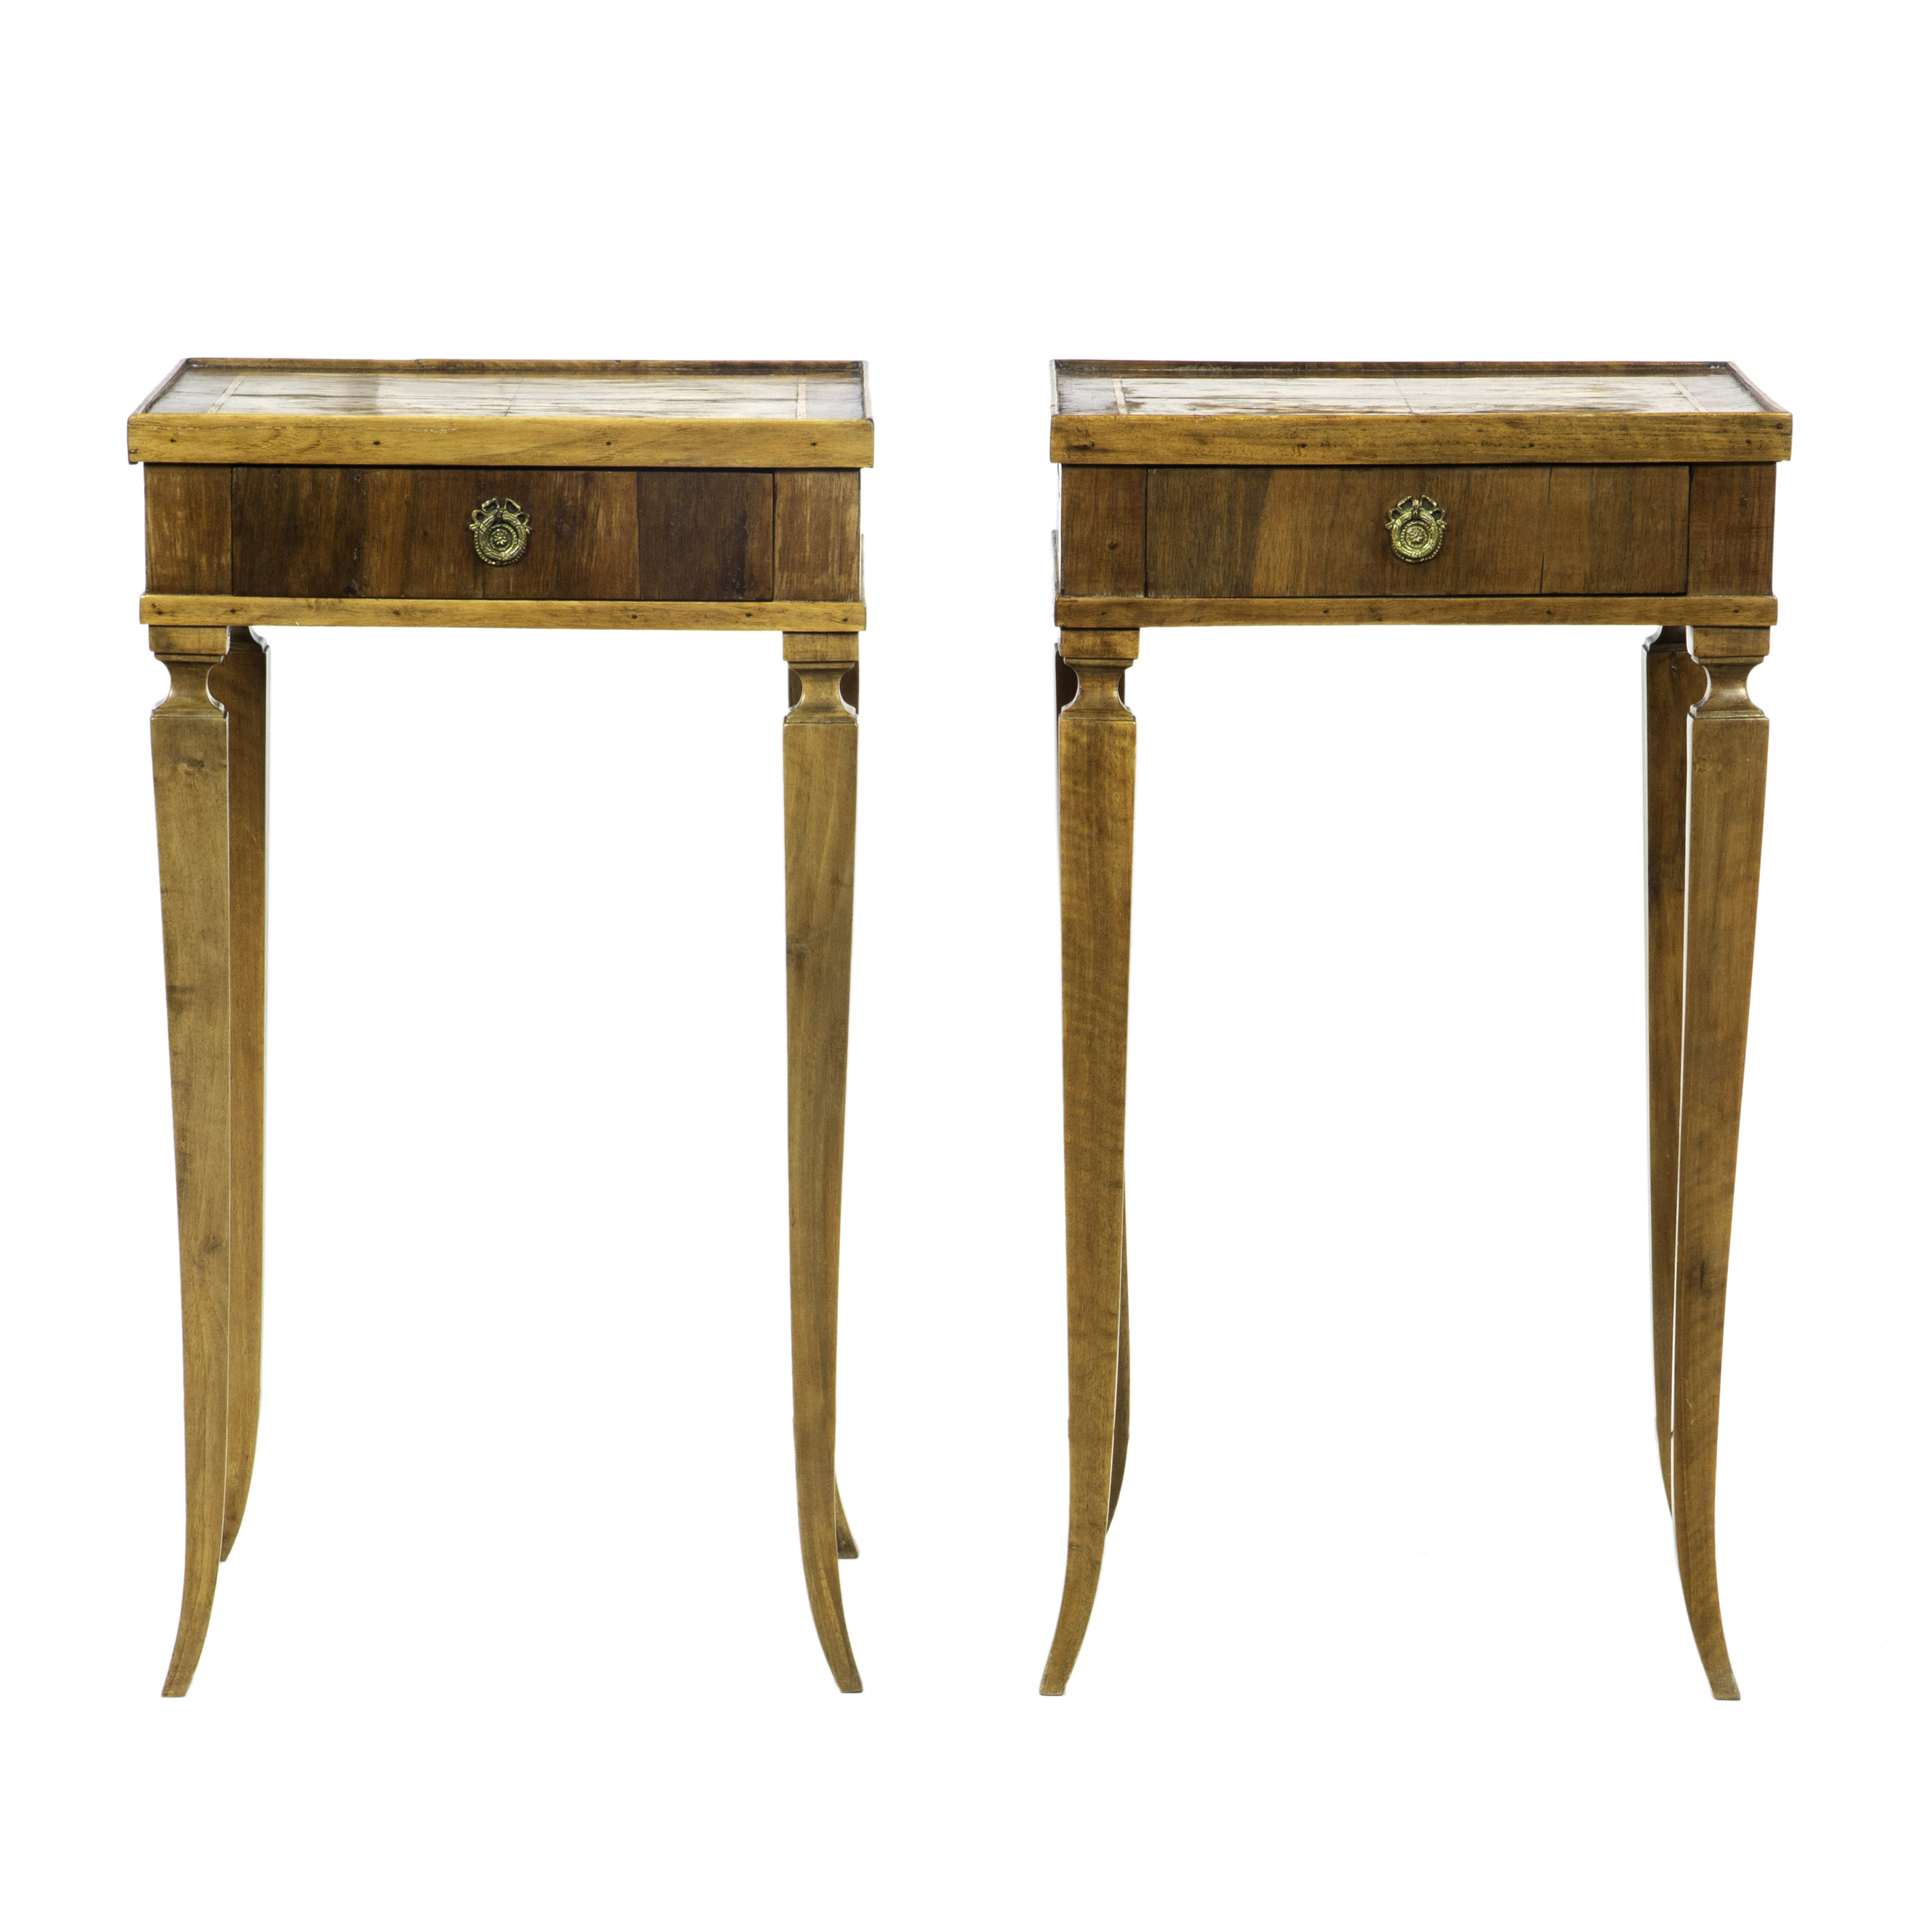 A PAIR OF FRENCH SINGLE DRAWER 3a429c